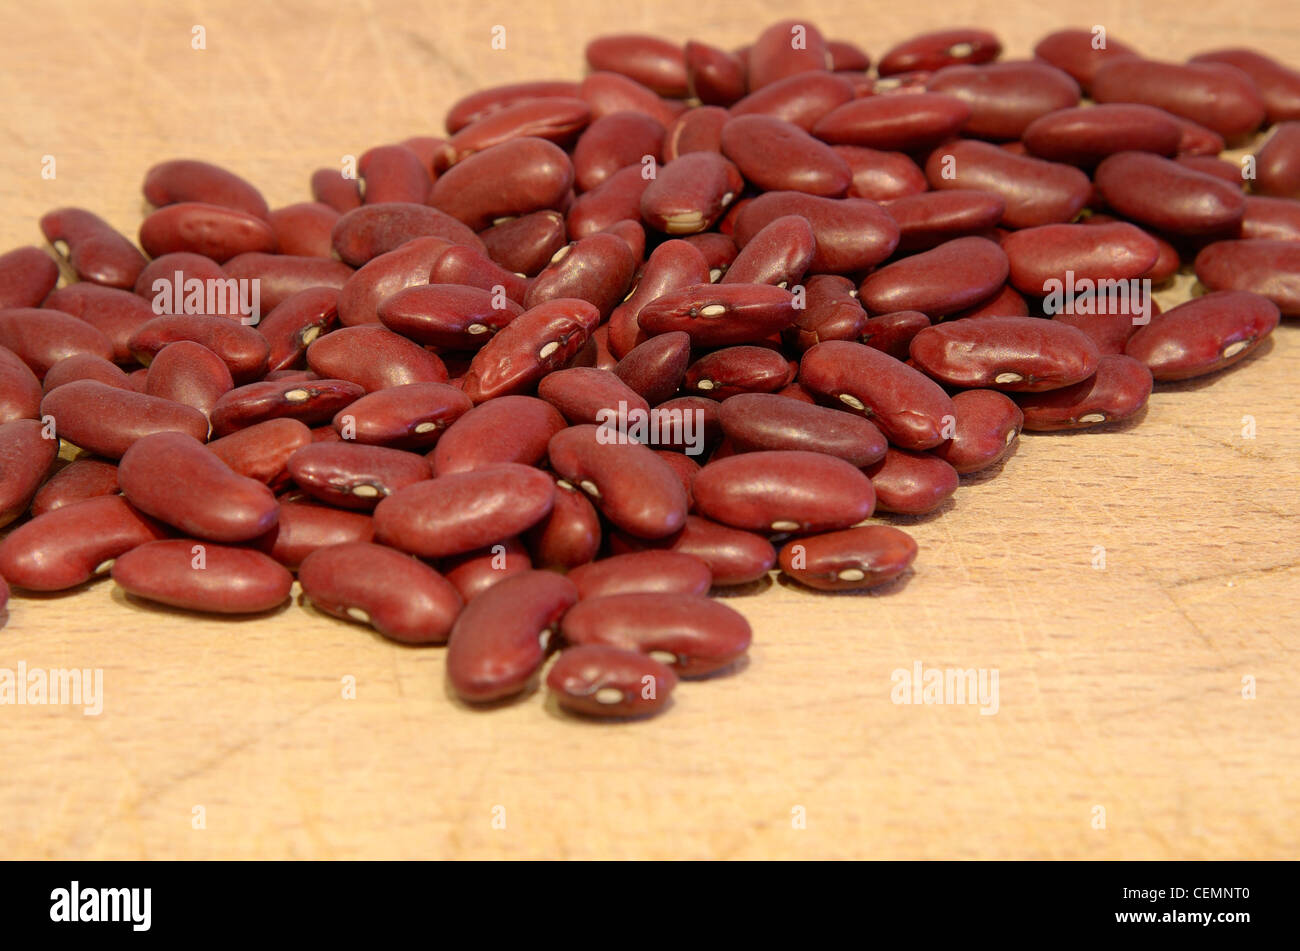 A close up of some dry red beans Stock Photo